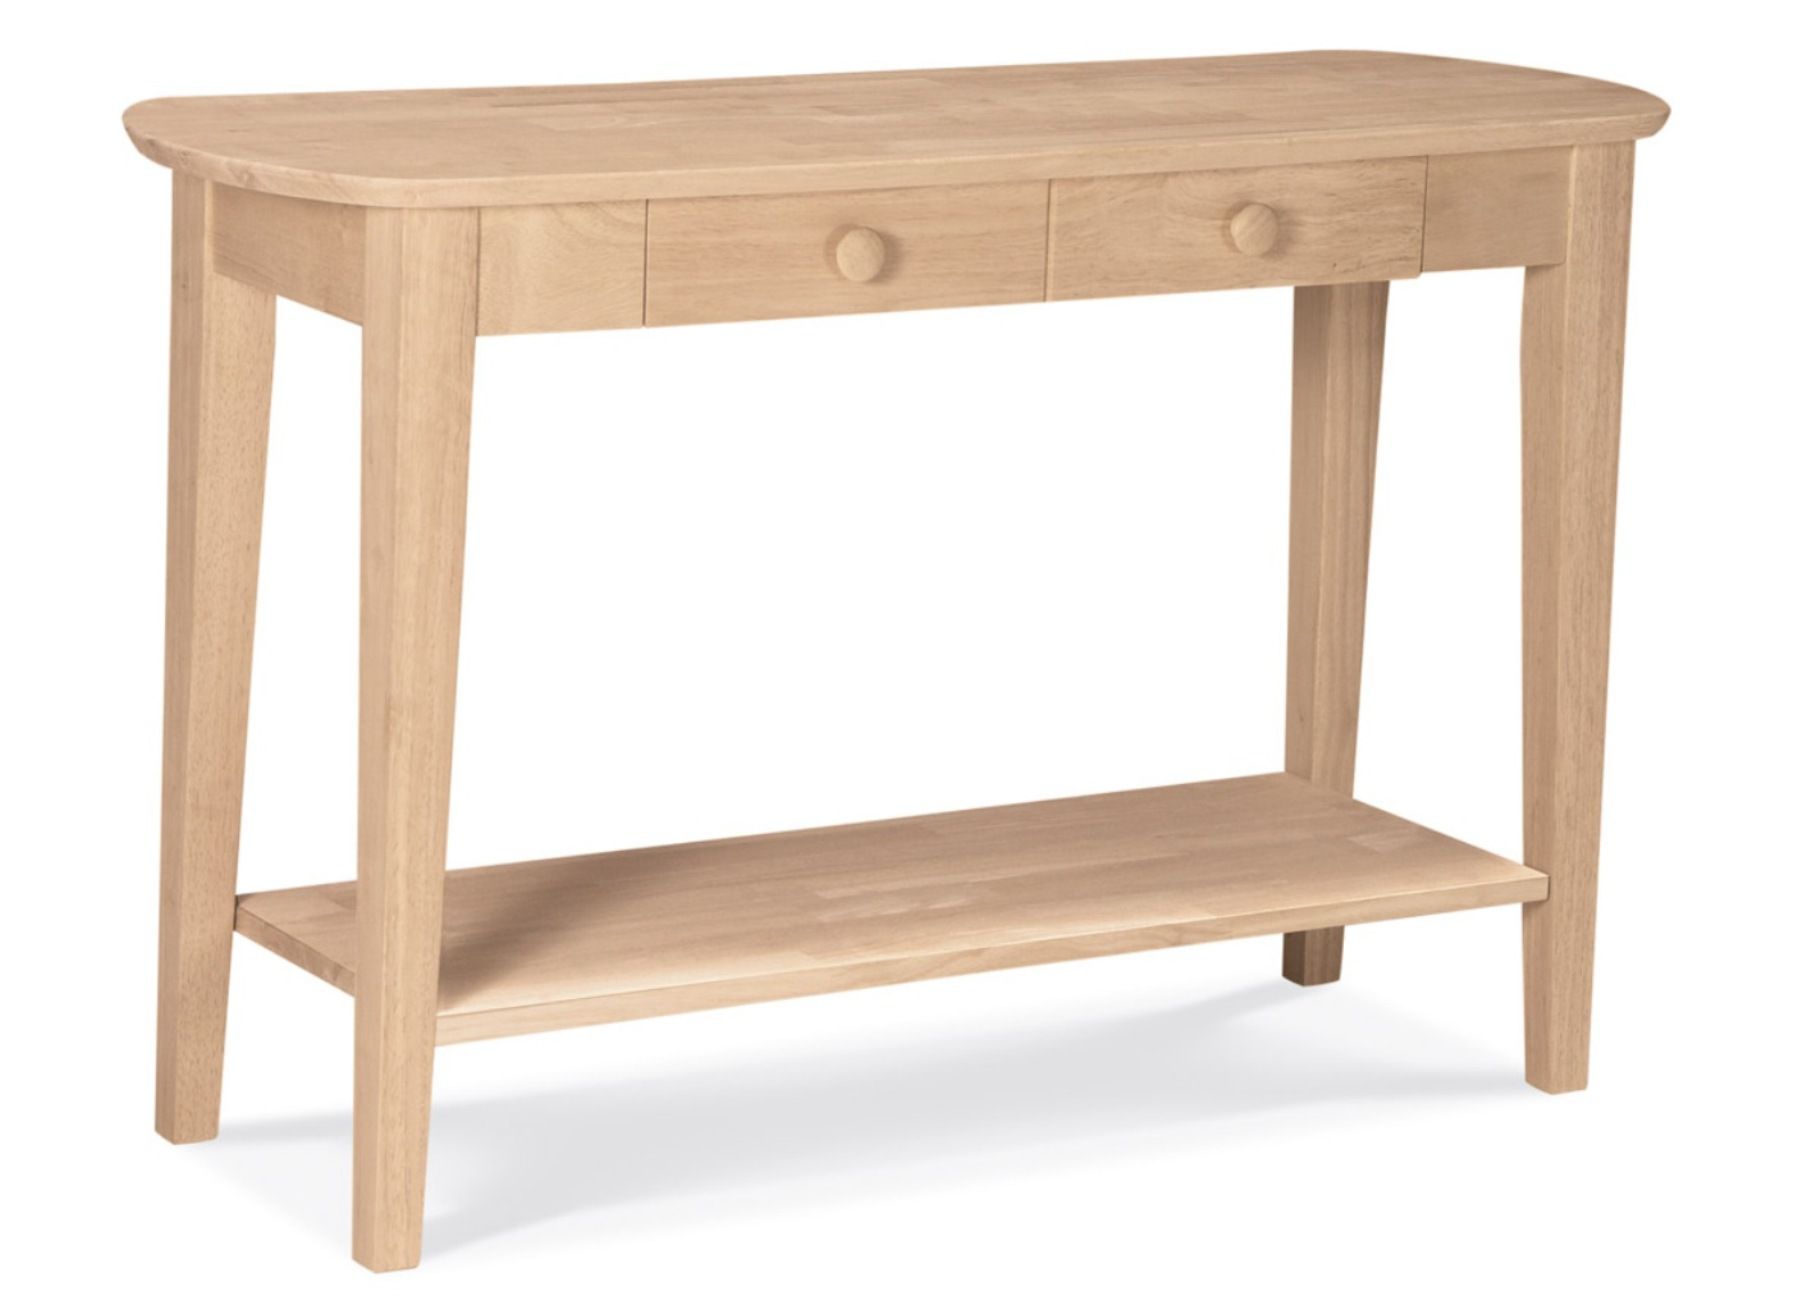 International Concepts Philips Oval Sofa Table Unfinished